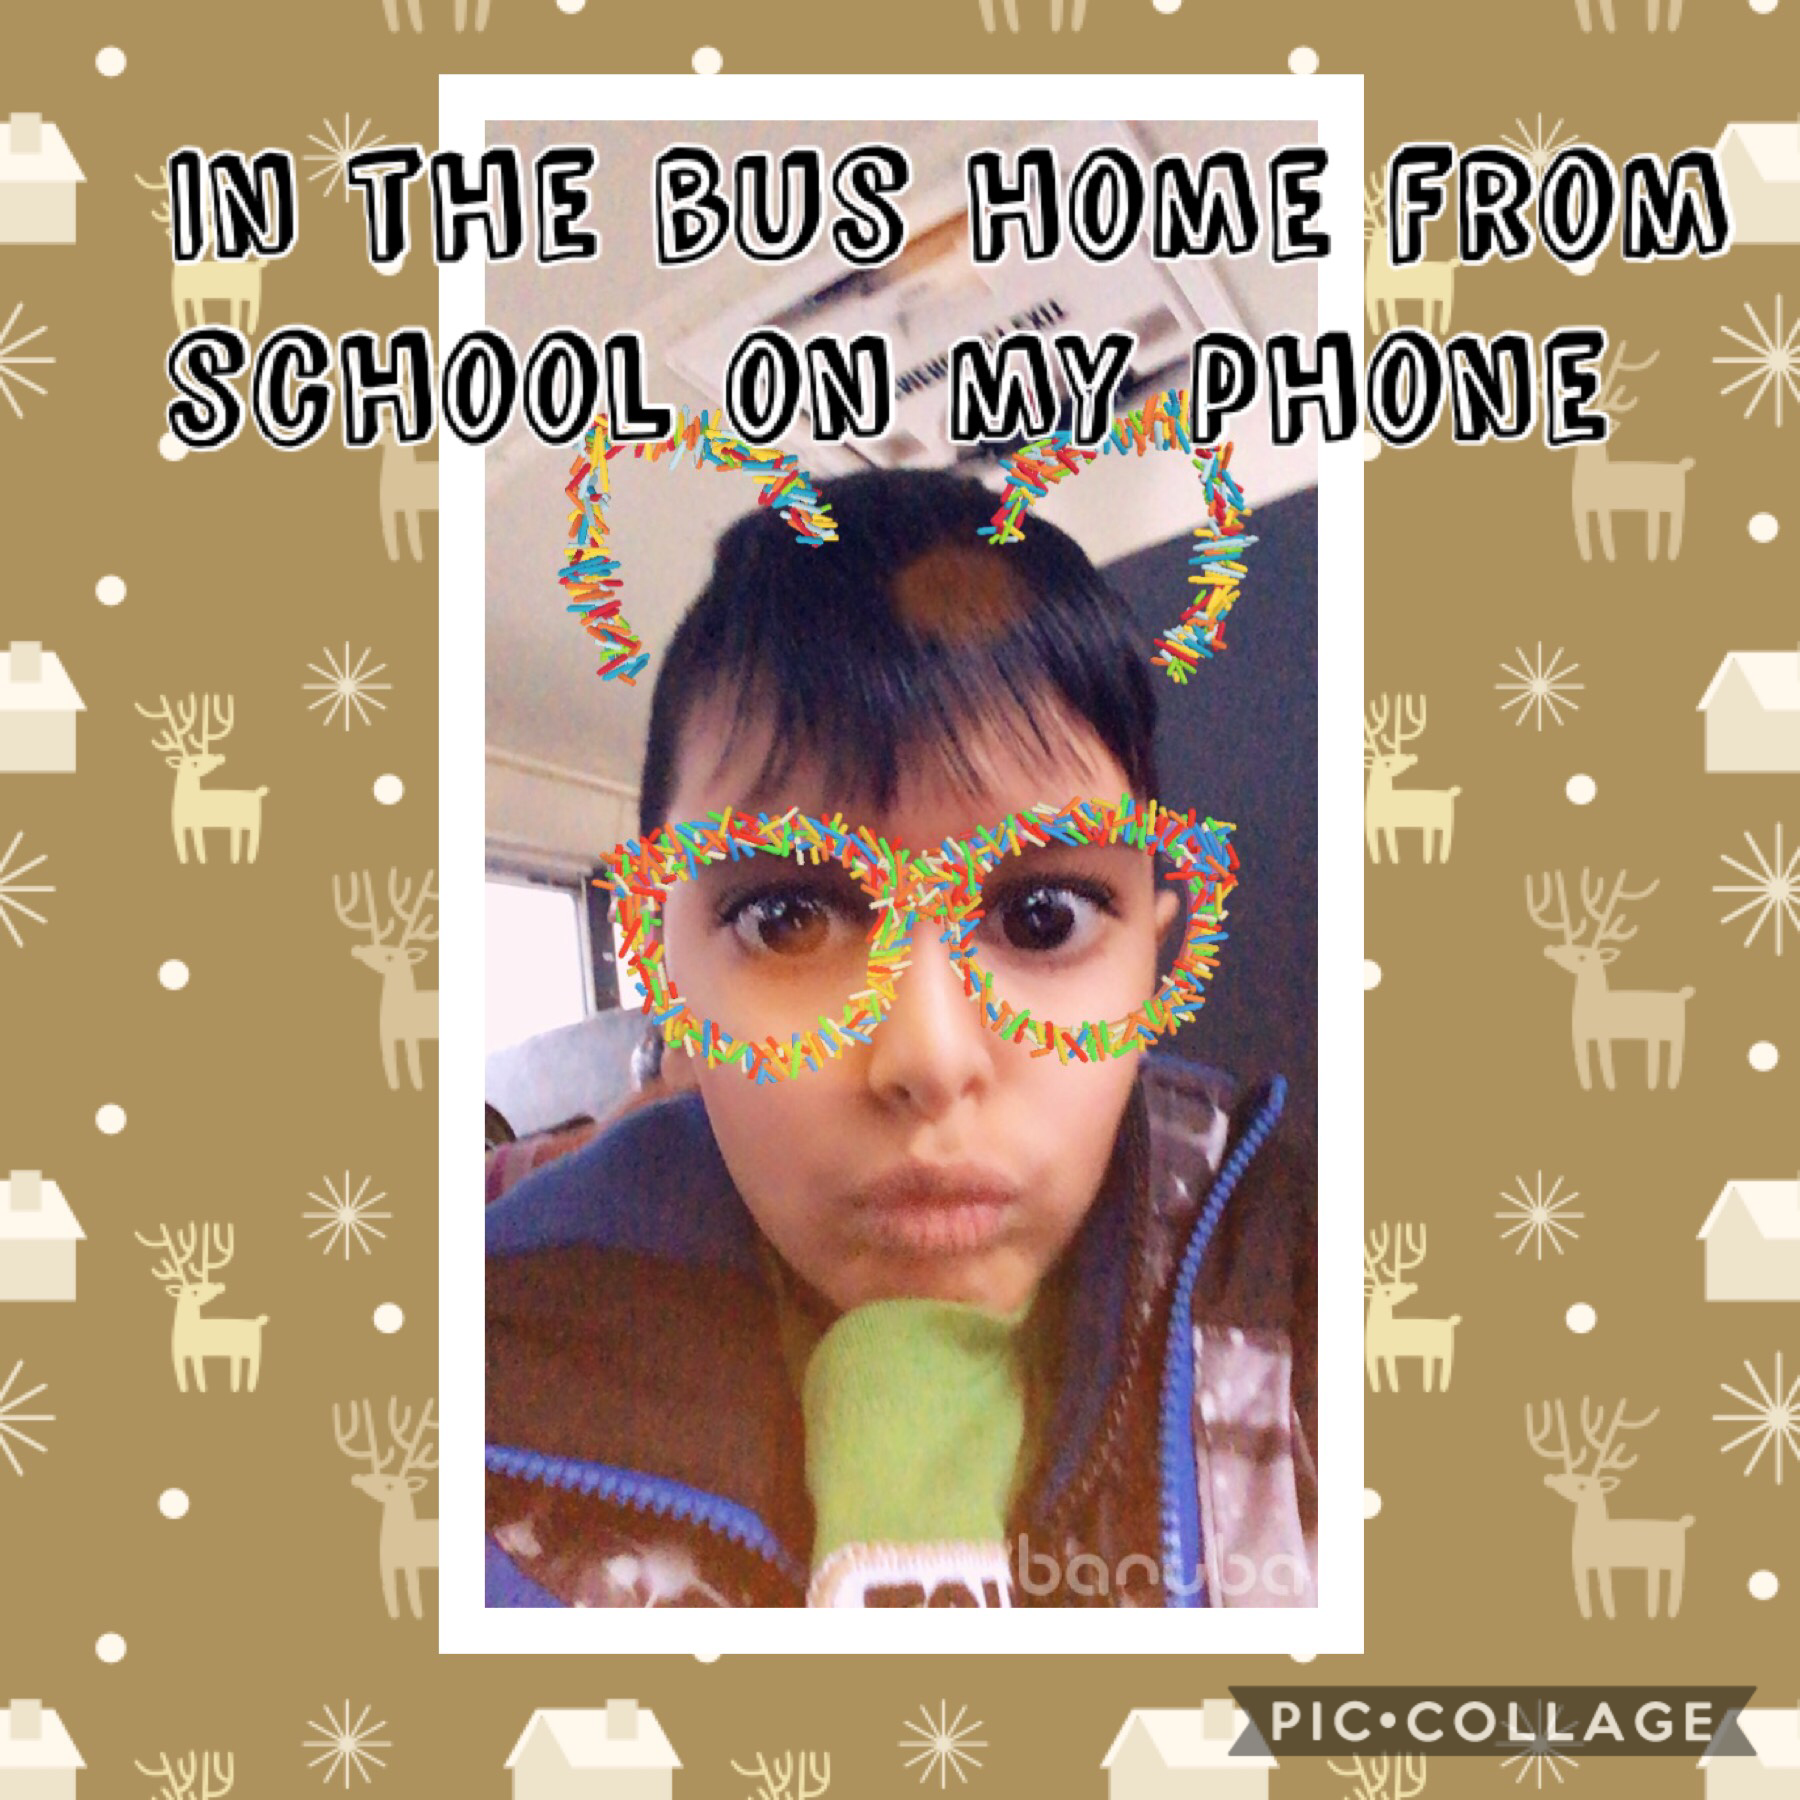 Hello the question of the day is.... do you ever take your phone to school or ride a bus or play on phone in bus?? 